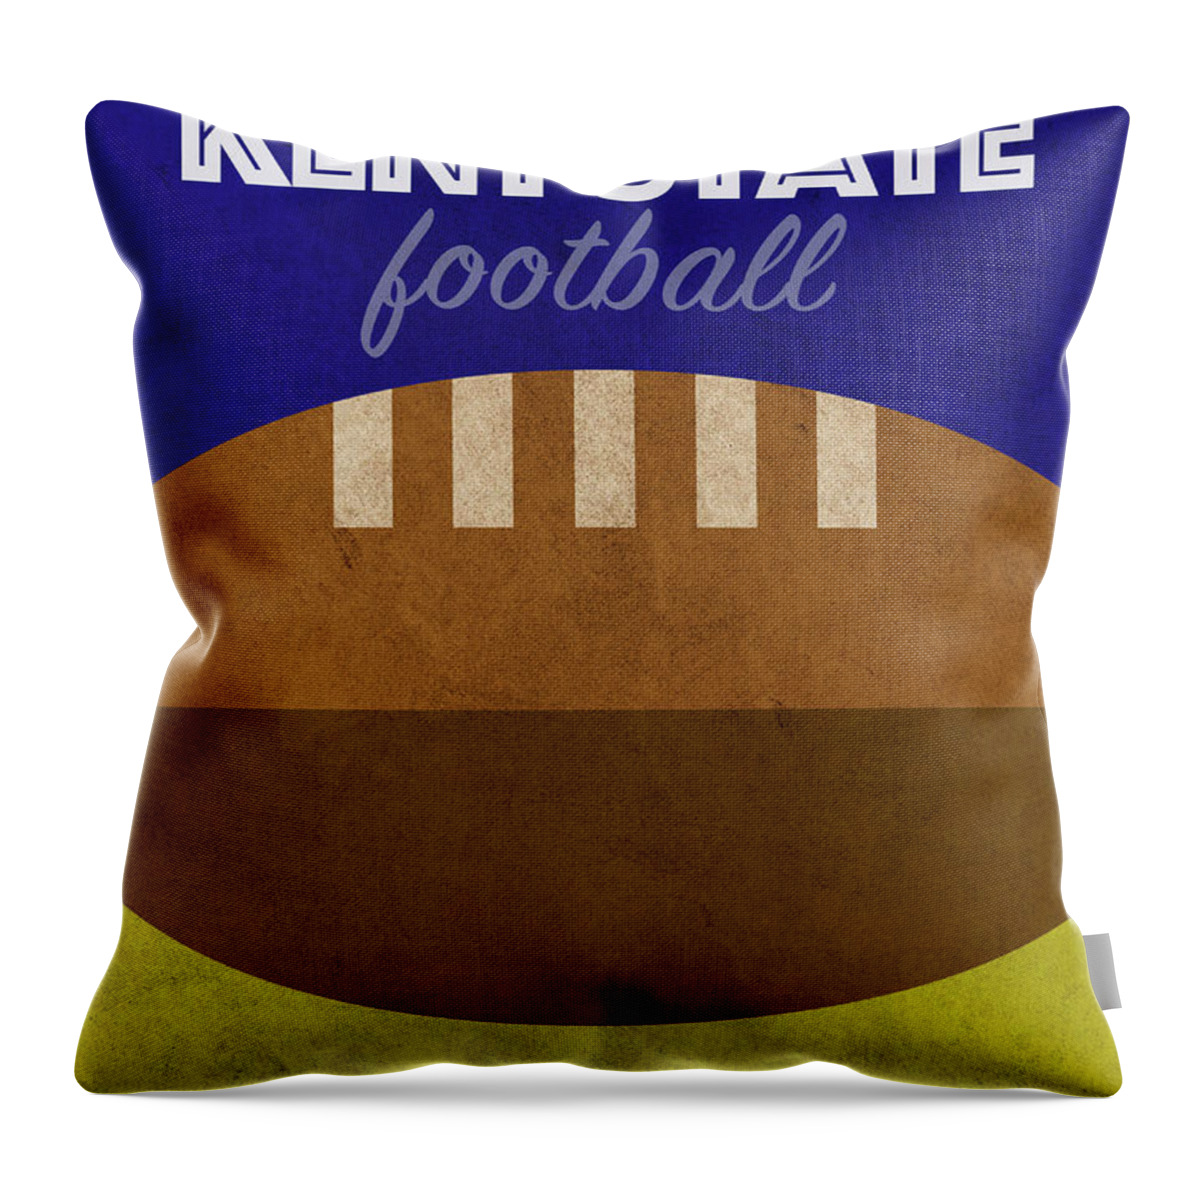 Kent State Throw Pillow featuring the mixed media Kent State Football College Sports Retro Vintage Poster by Design Turnpike